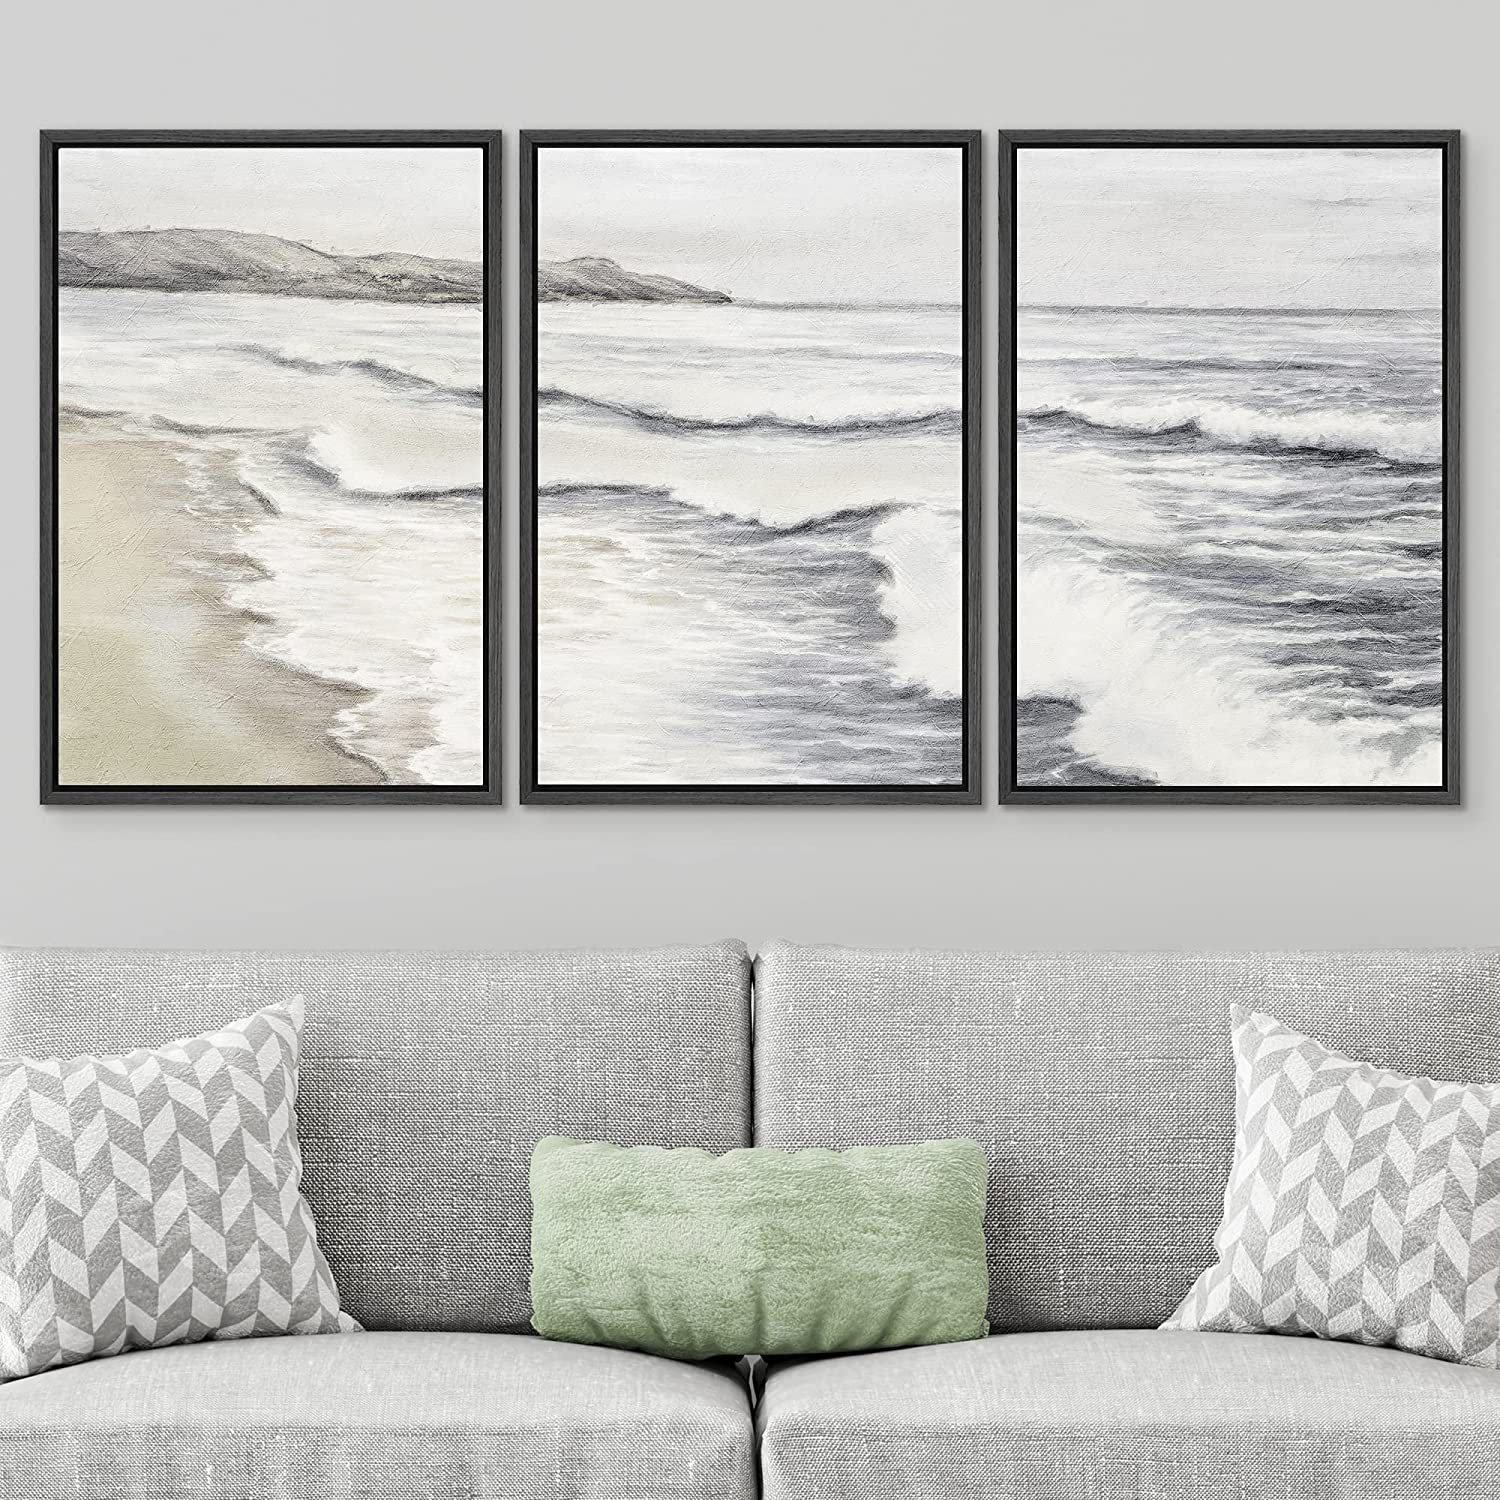 Muted Landscape Painting - Set of 3 - Art Prints or Canvases